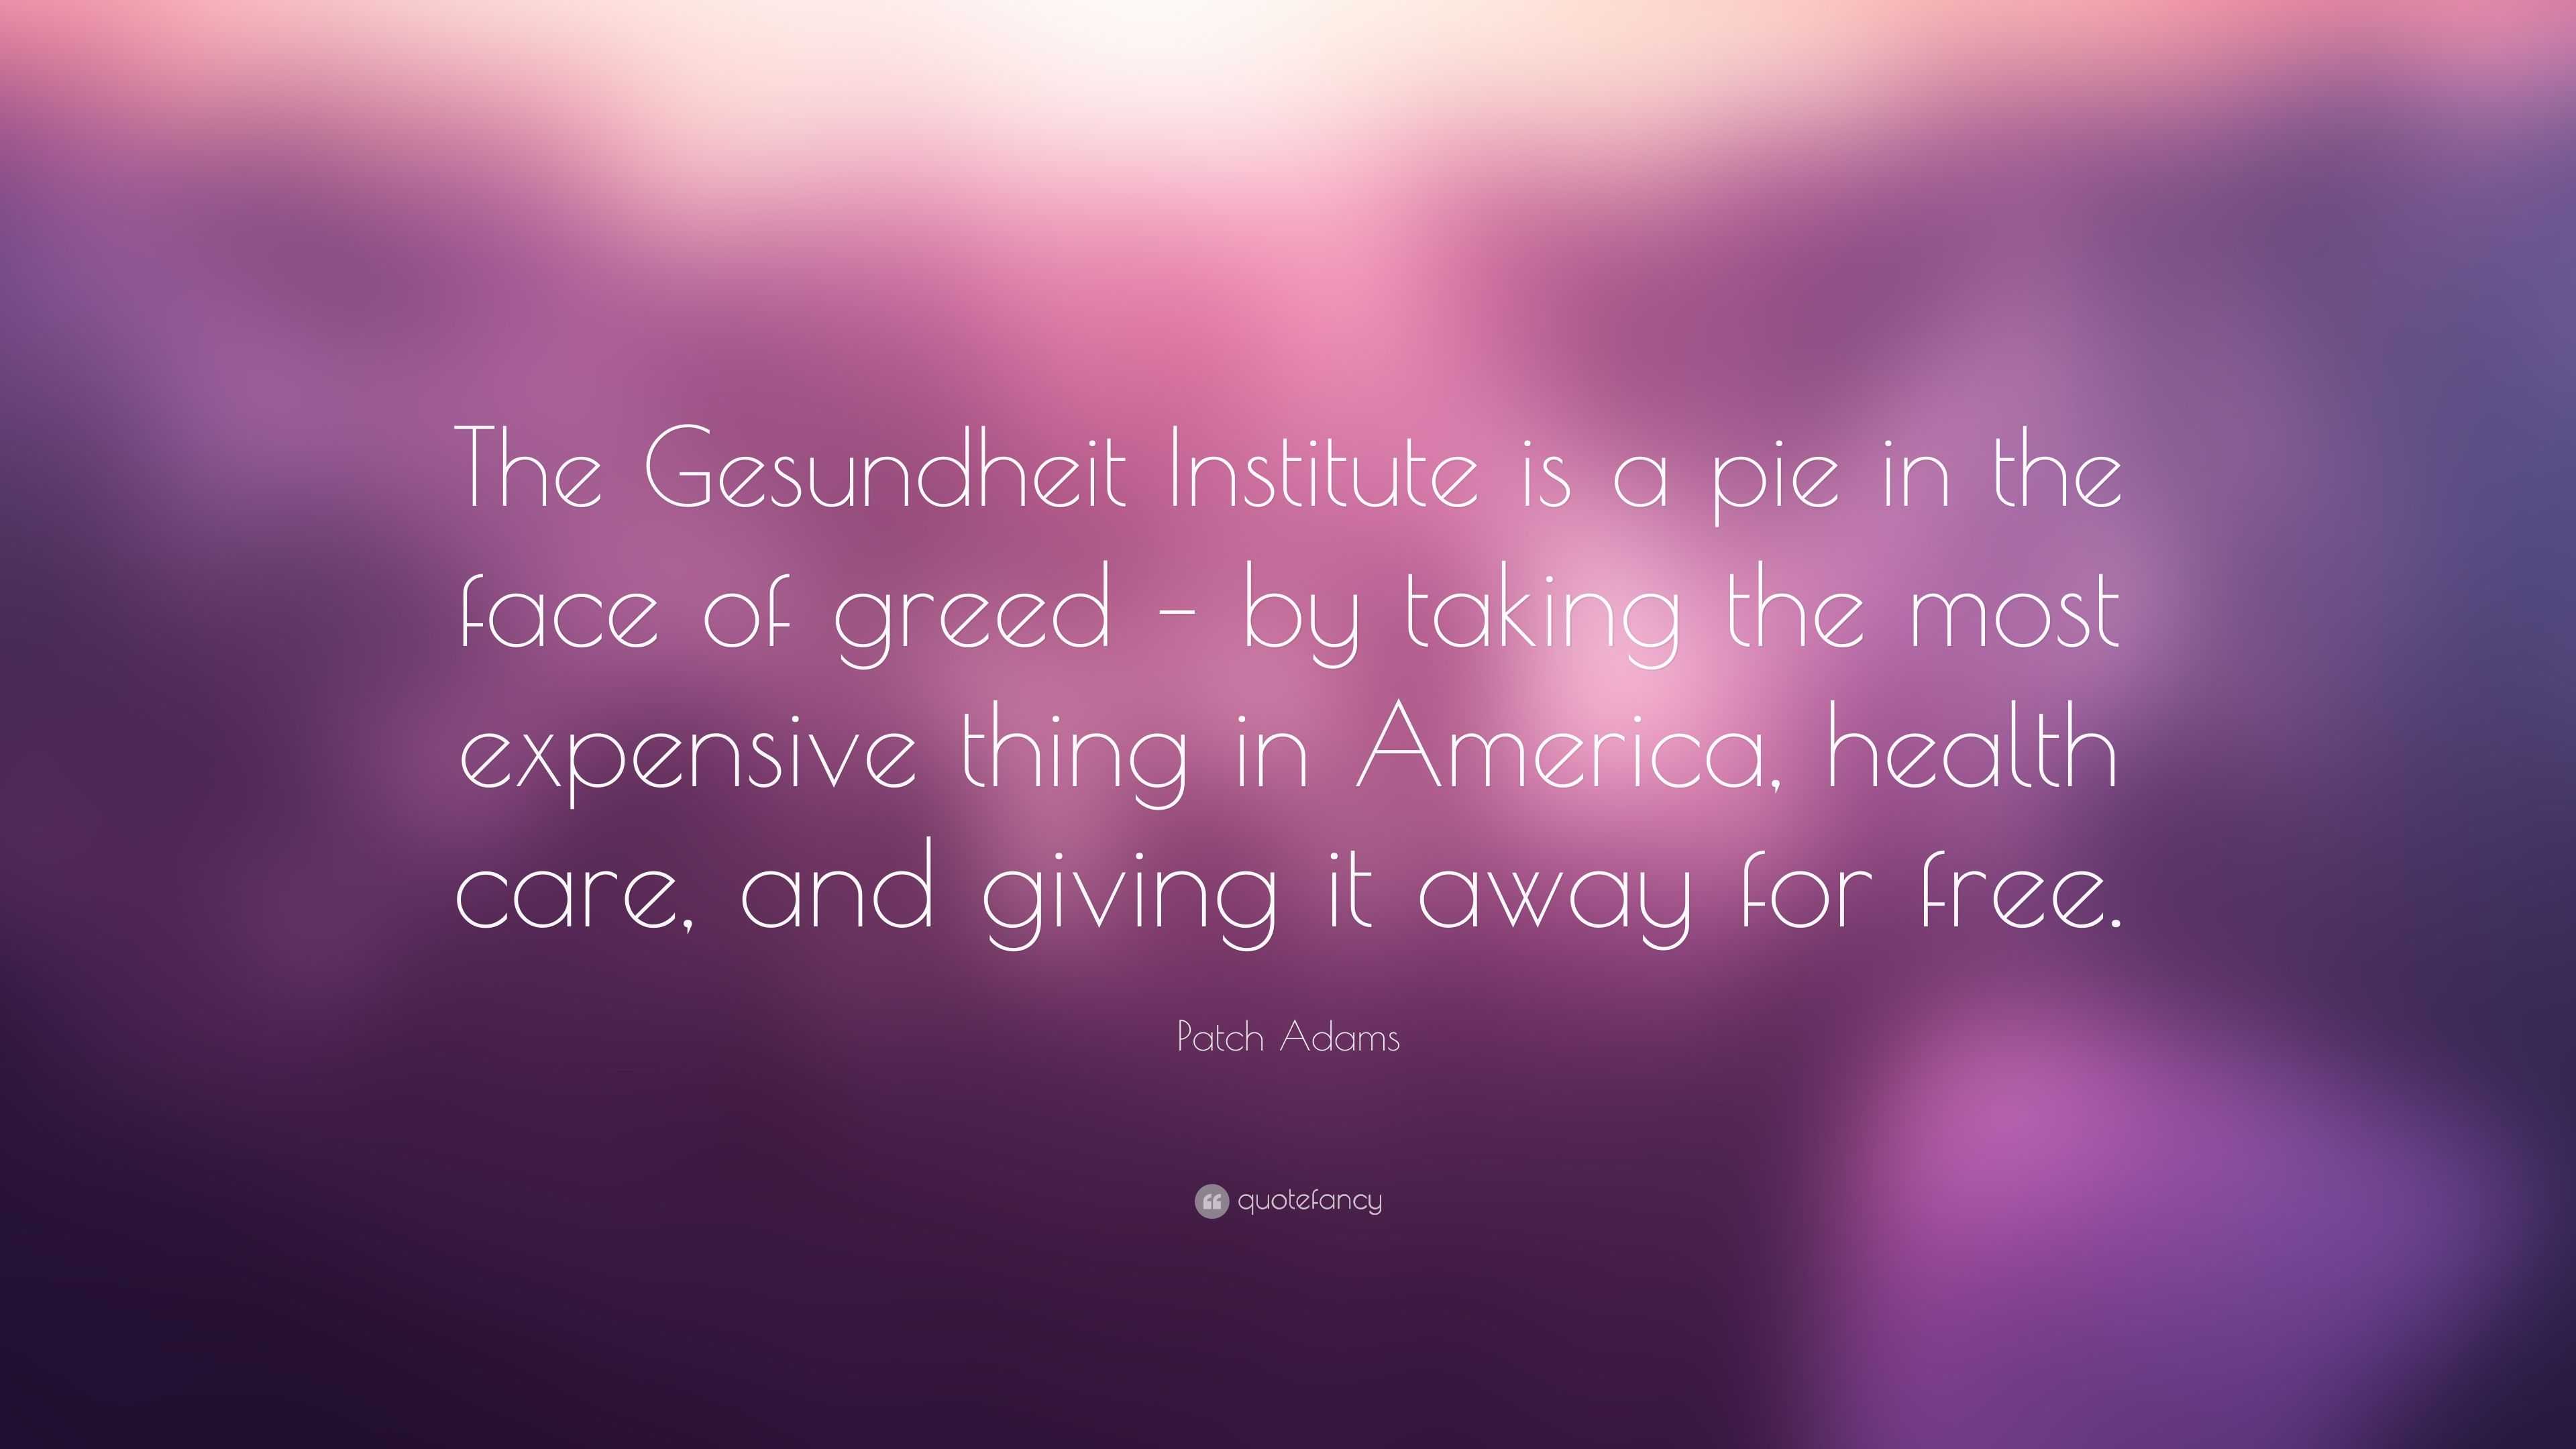 Patch Adams Quote: “The Gesundheit Institute is a pie in the face of ...